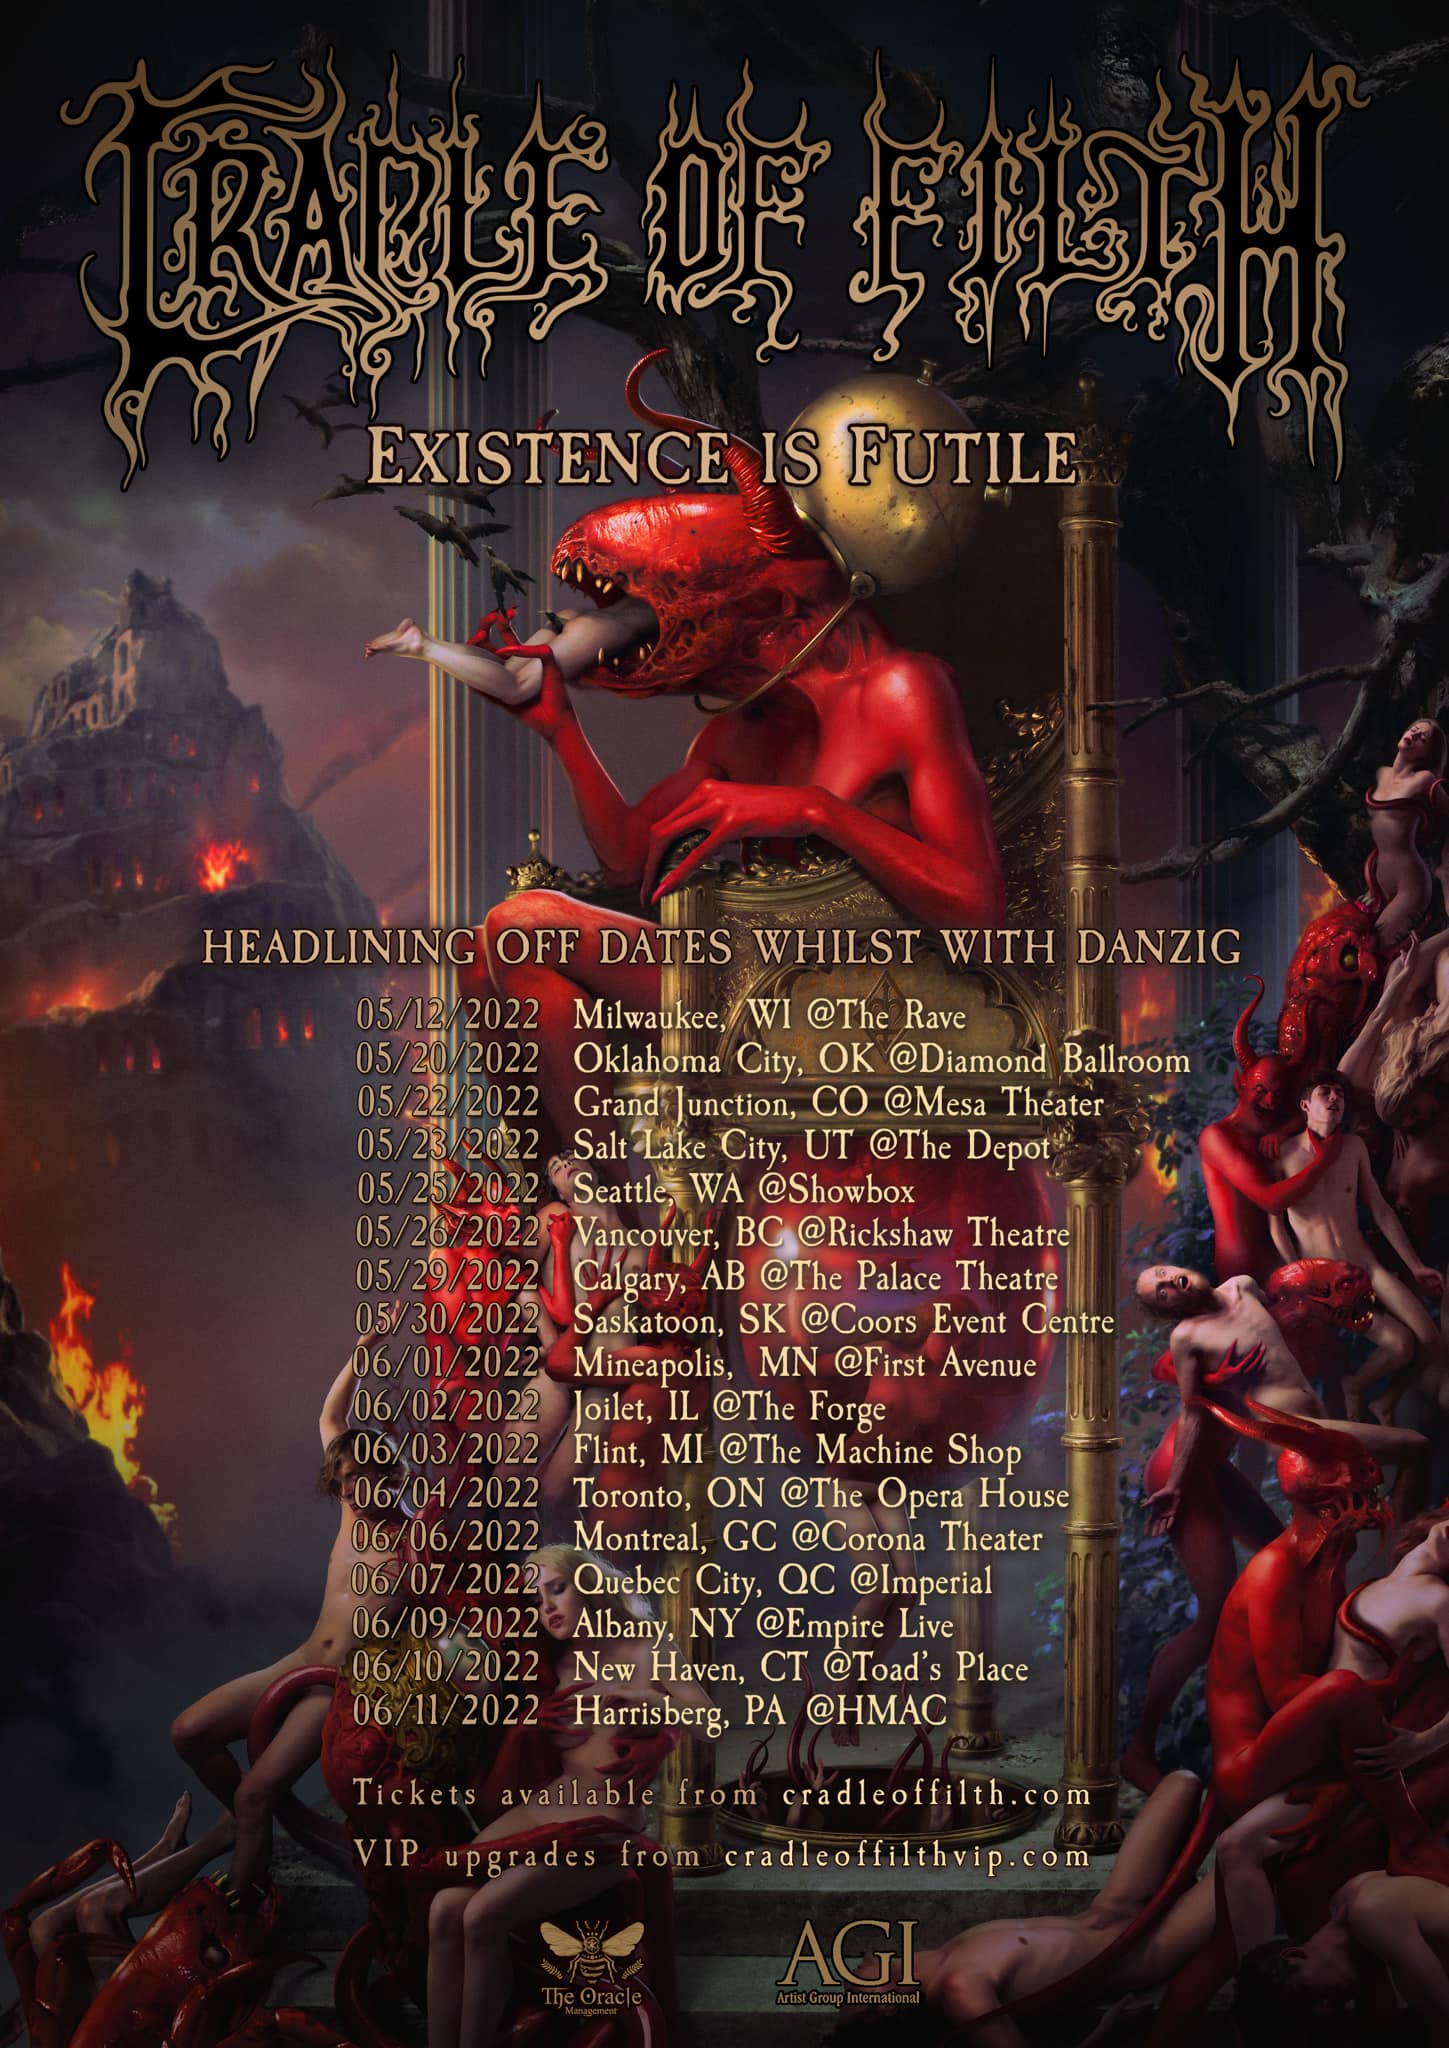 Cradle of Filth Announce Spring 2022 Tour Dates mxdwn Music